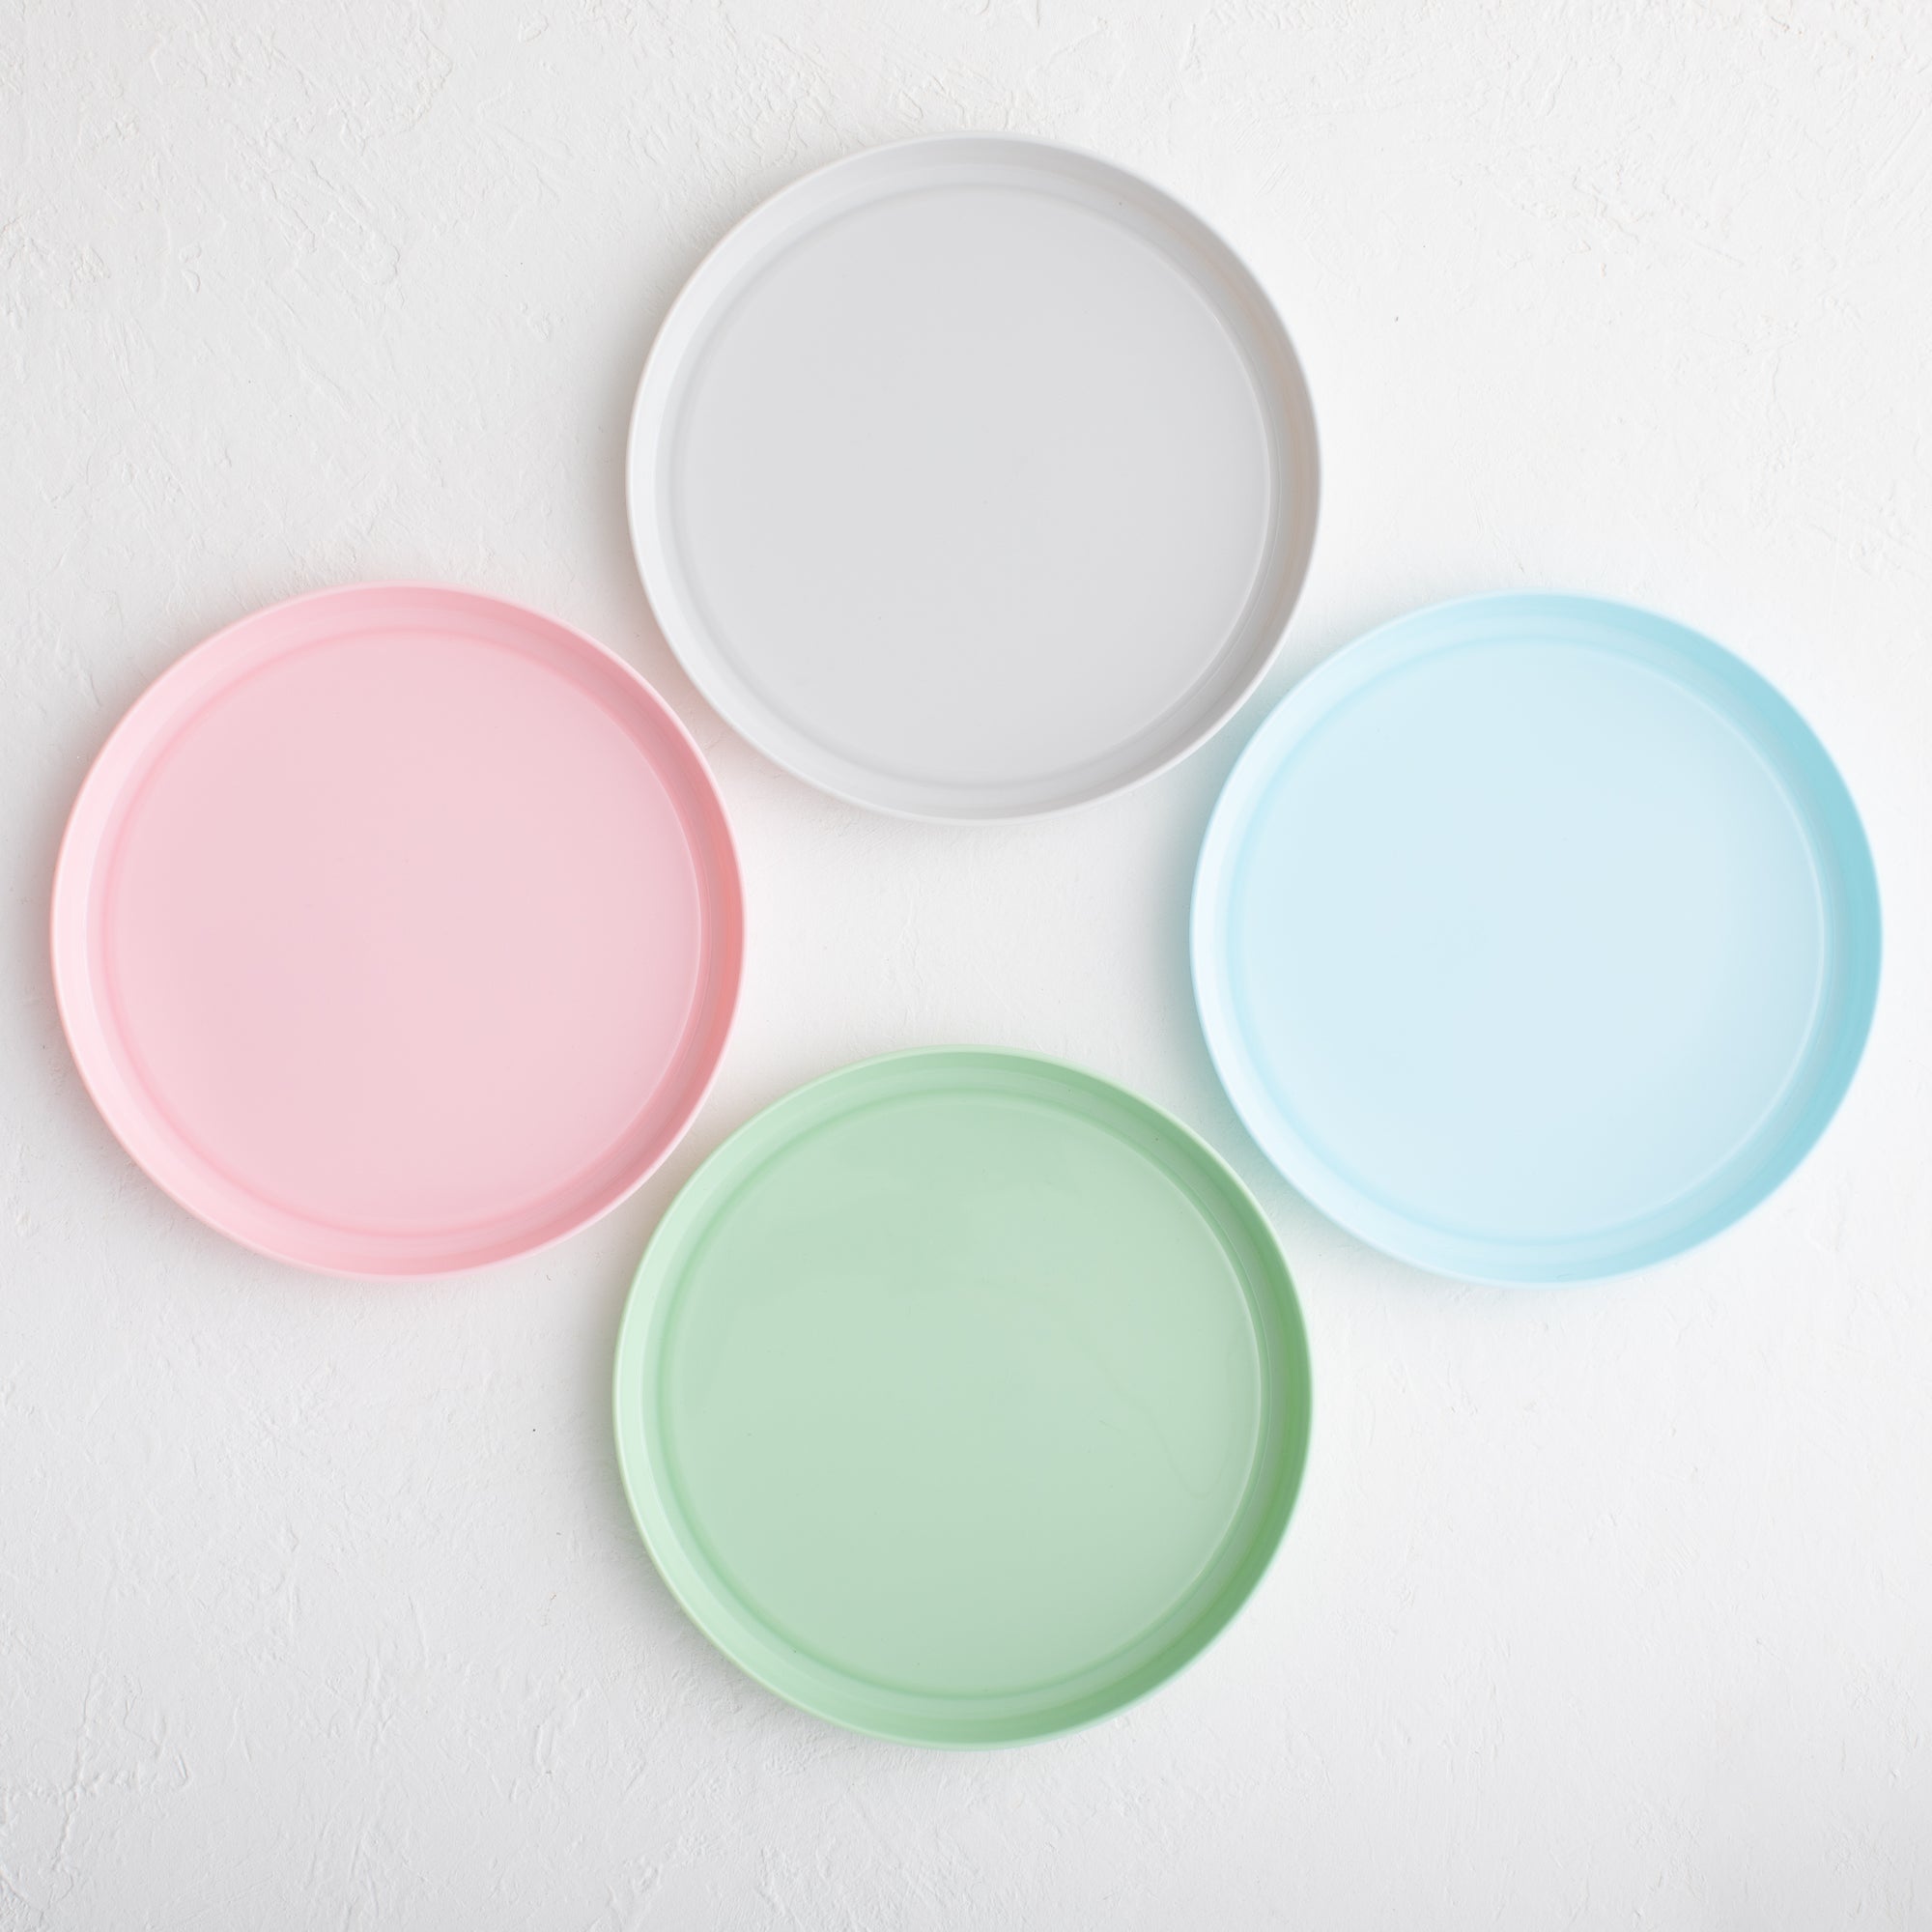 Recycled Plastic Plates for Eco-Friendly Toddlers